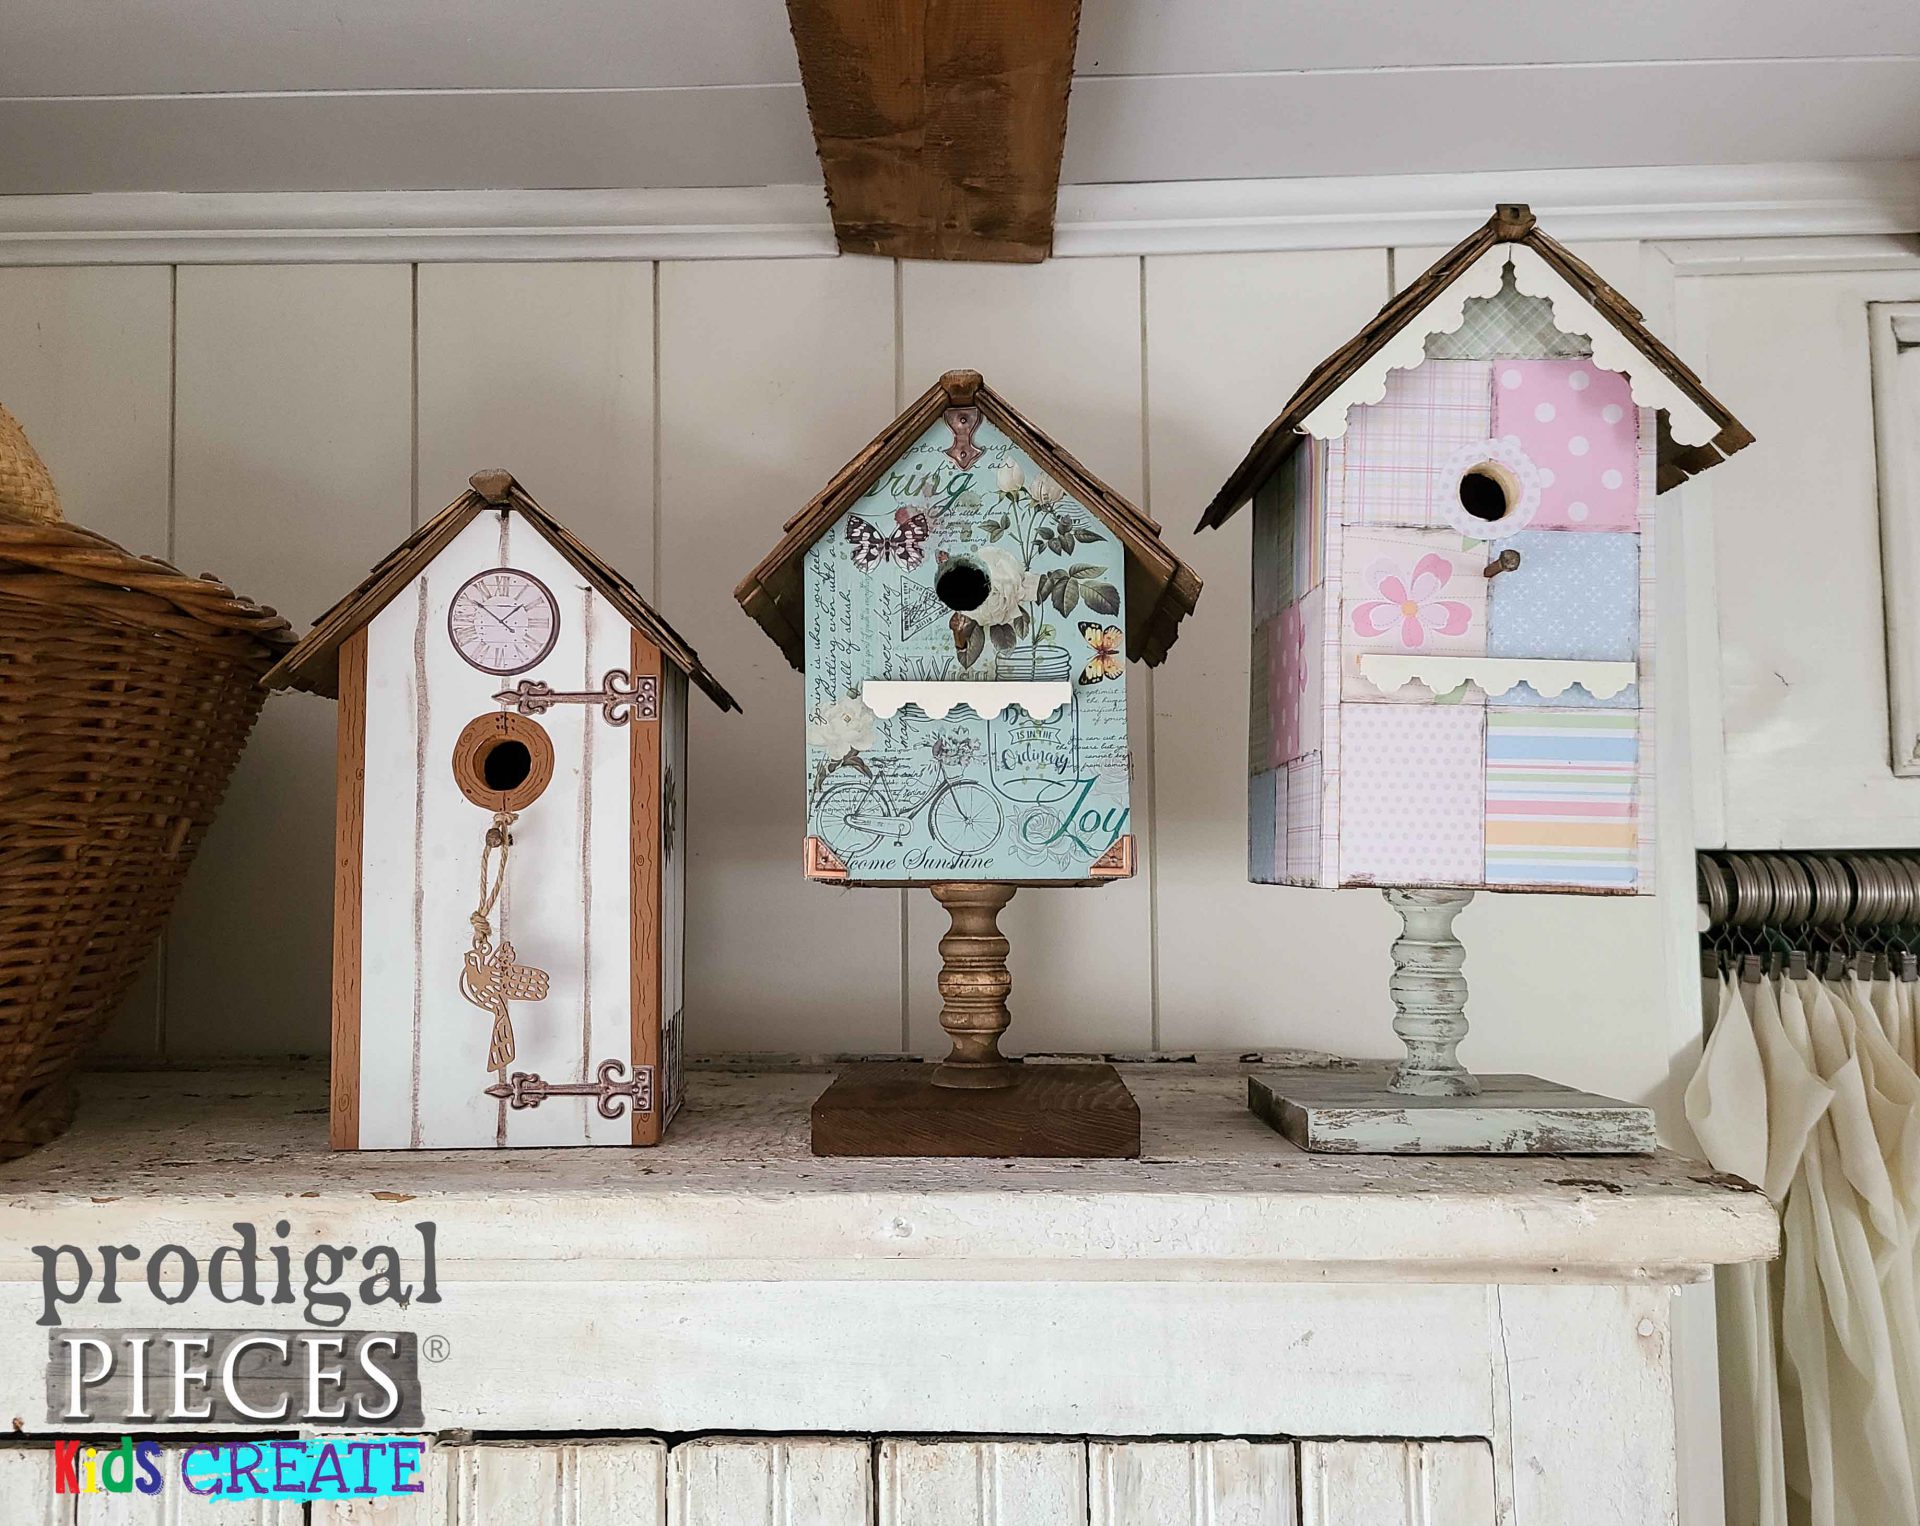 Three DIY Birdhouses with Tutorial by Prodigal Pieces KIDS Create | Tutorial at prodigalpieces.com #prodigalpieces #woodworking #diy #farmhouse #kids